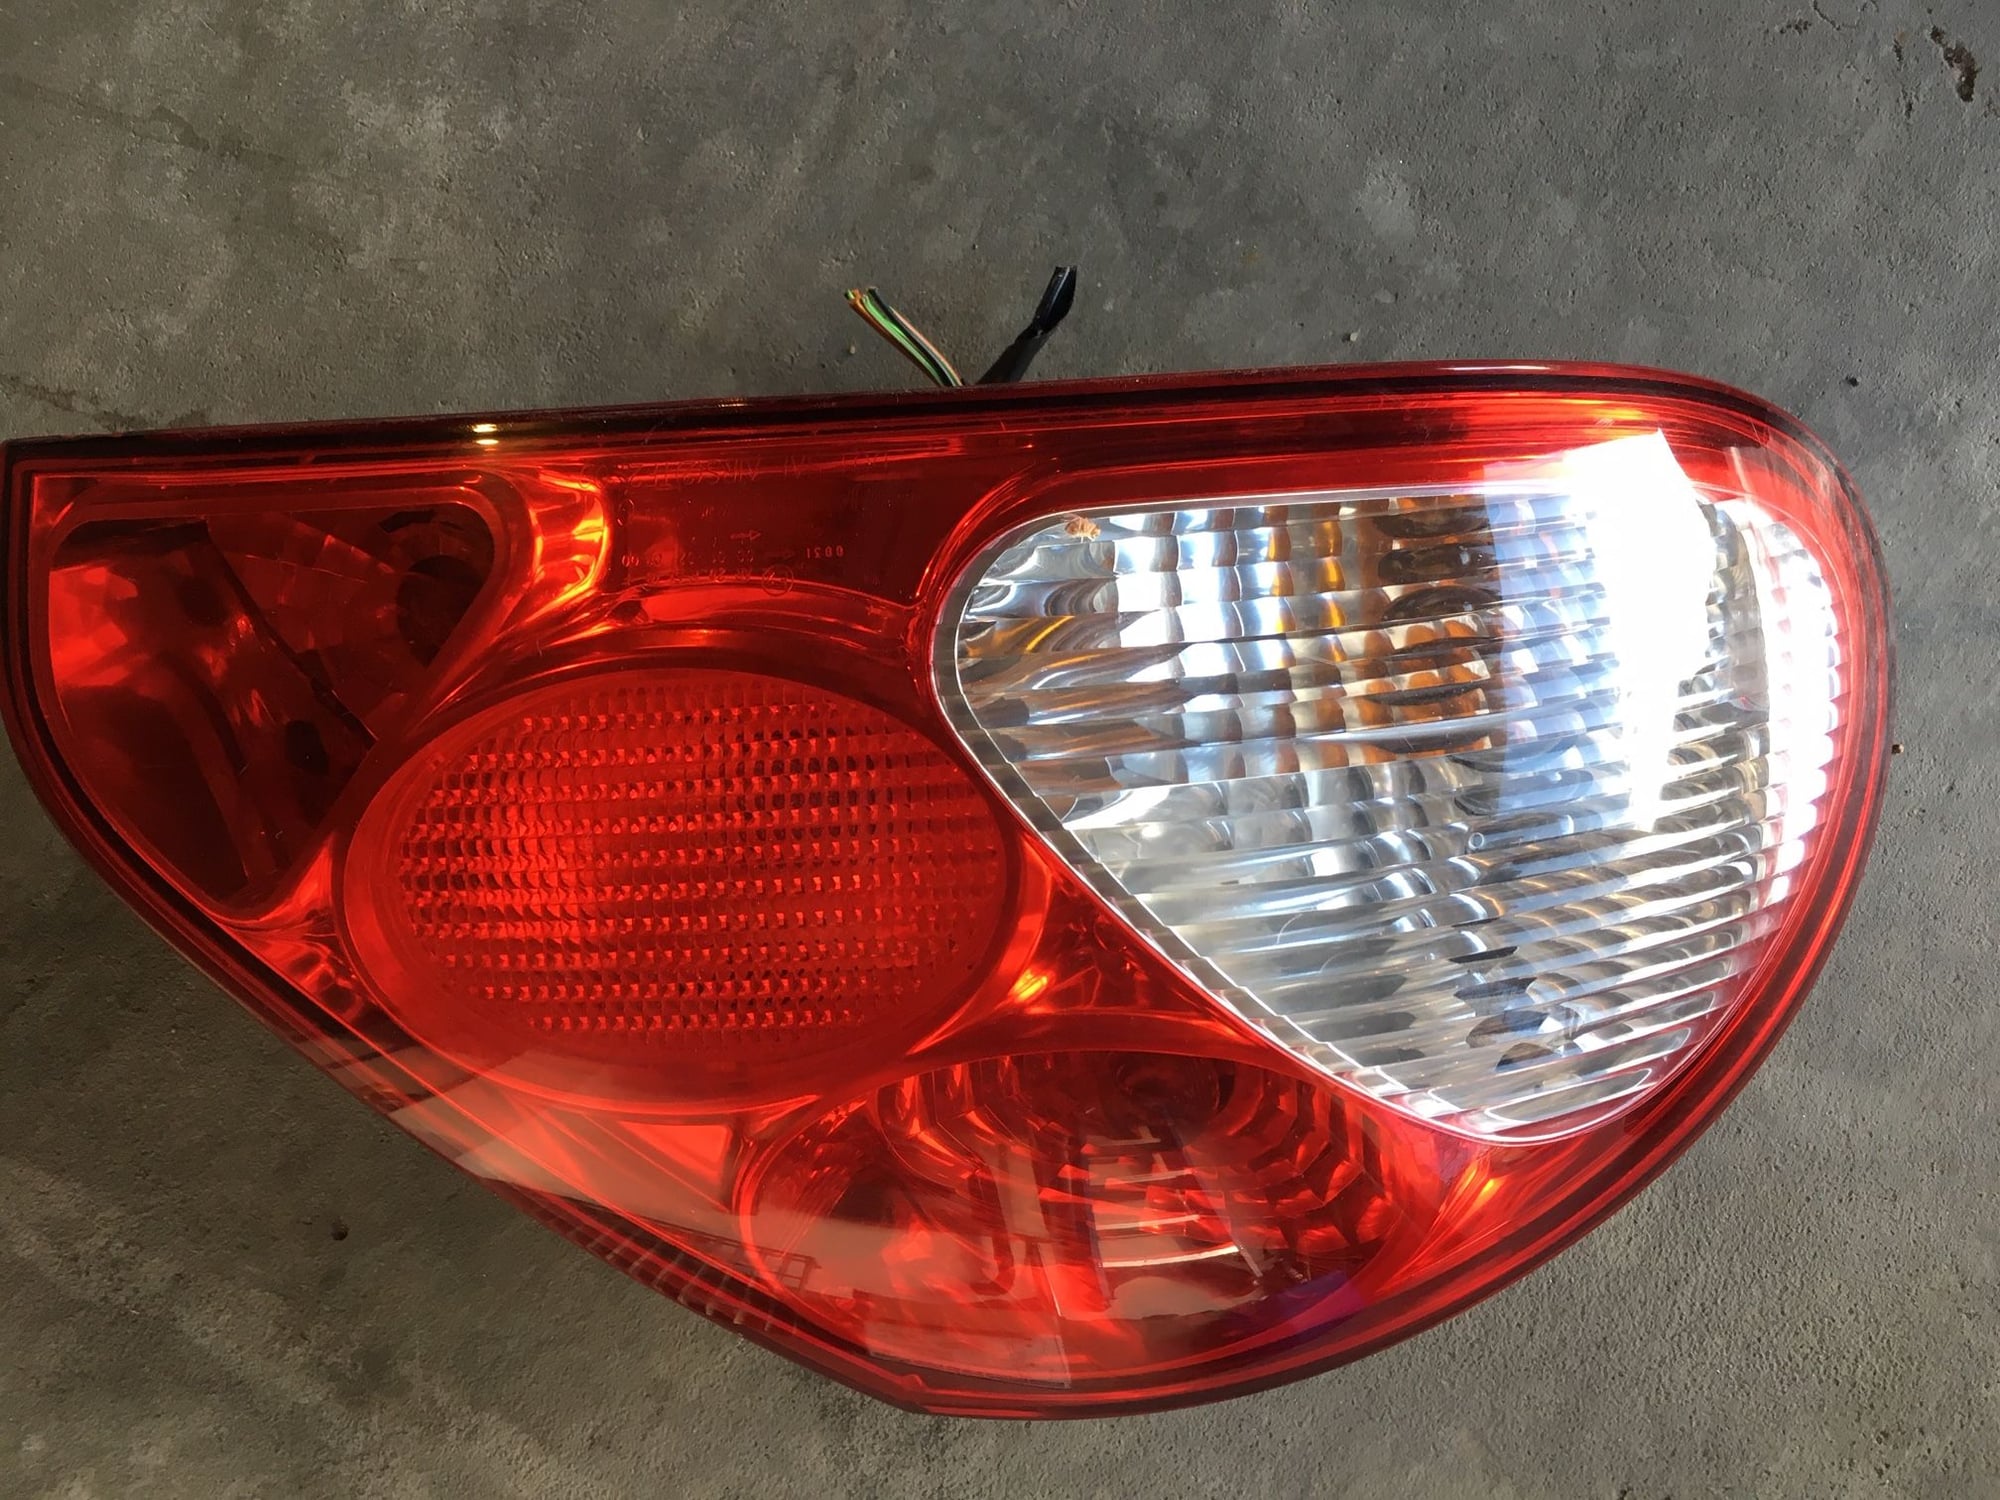 Lights - Taillights from a 2006 X-Type $45 each - Used - 2001 to 2008 Jaguar X-Type - Littleton, CO 80125, United States